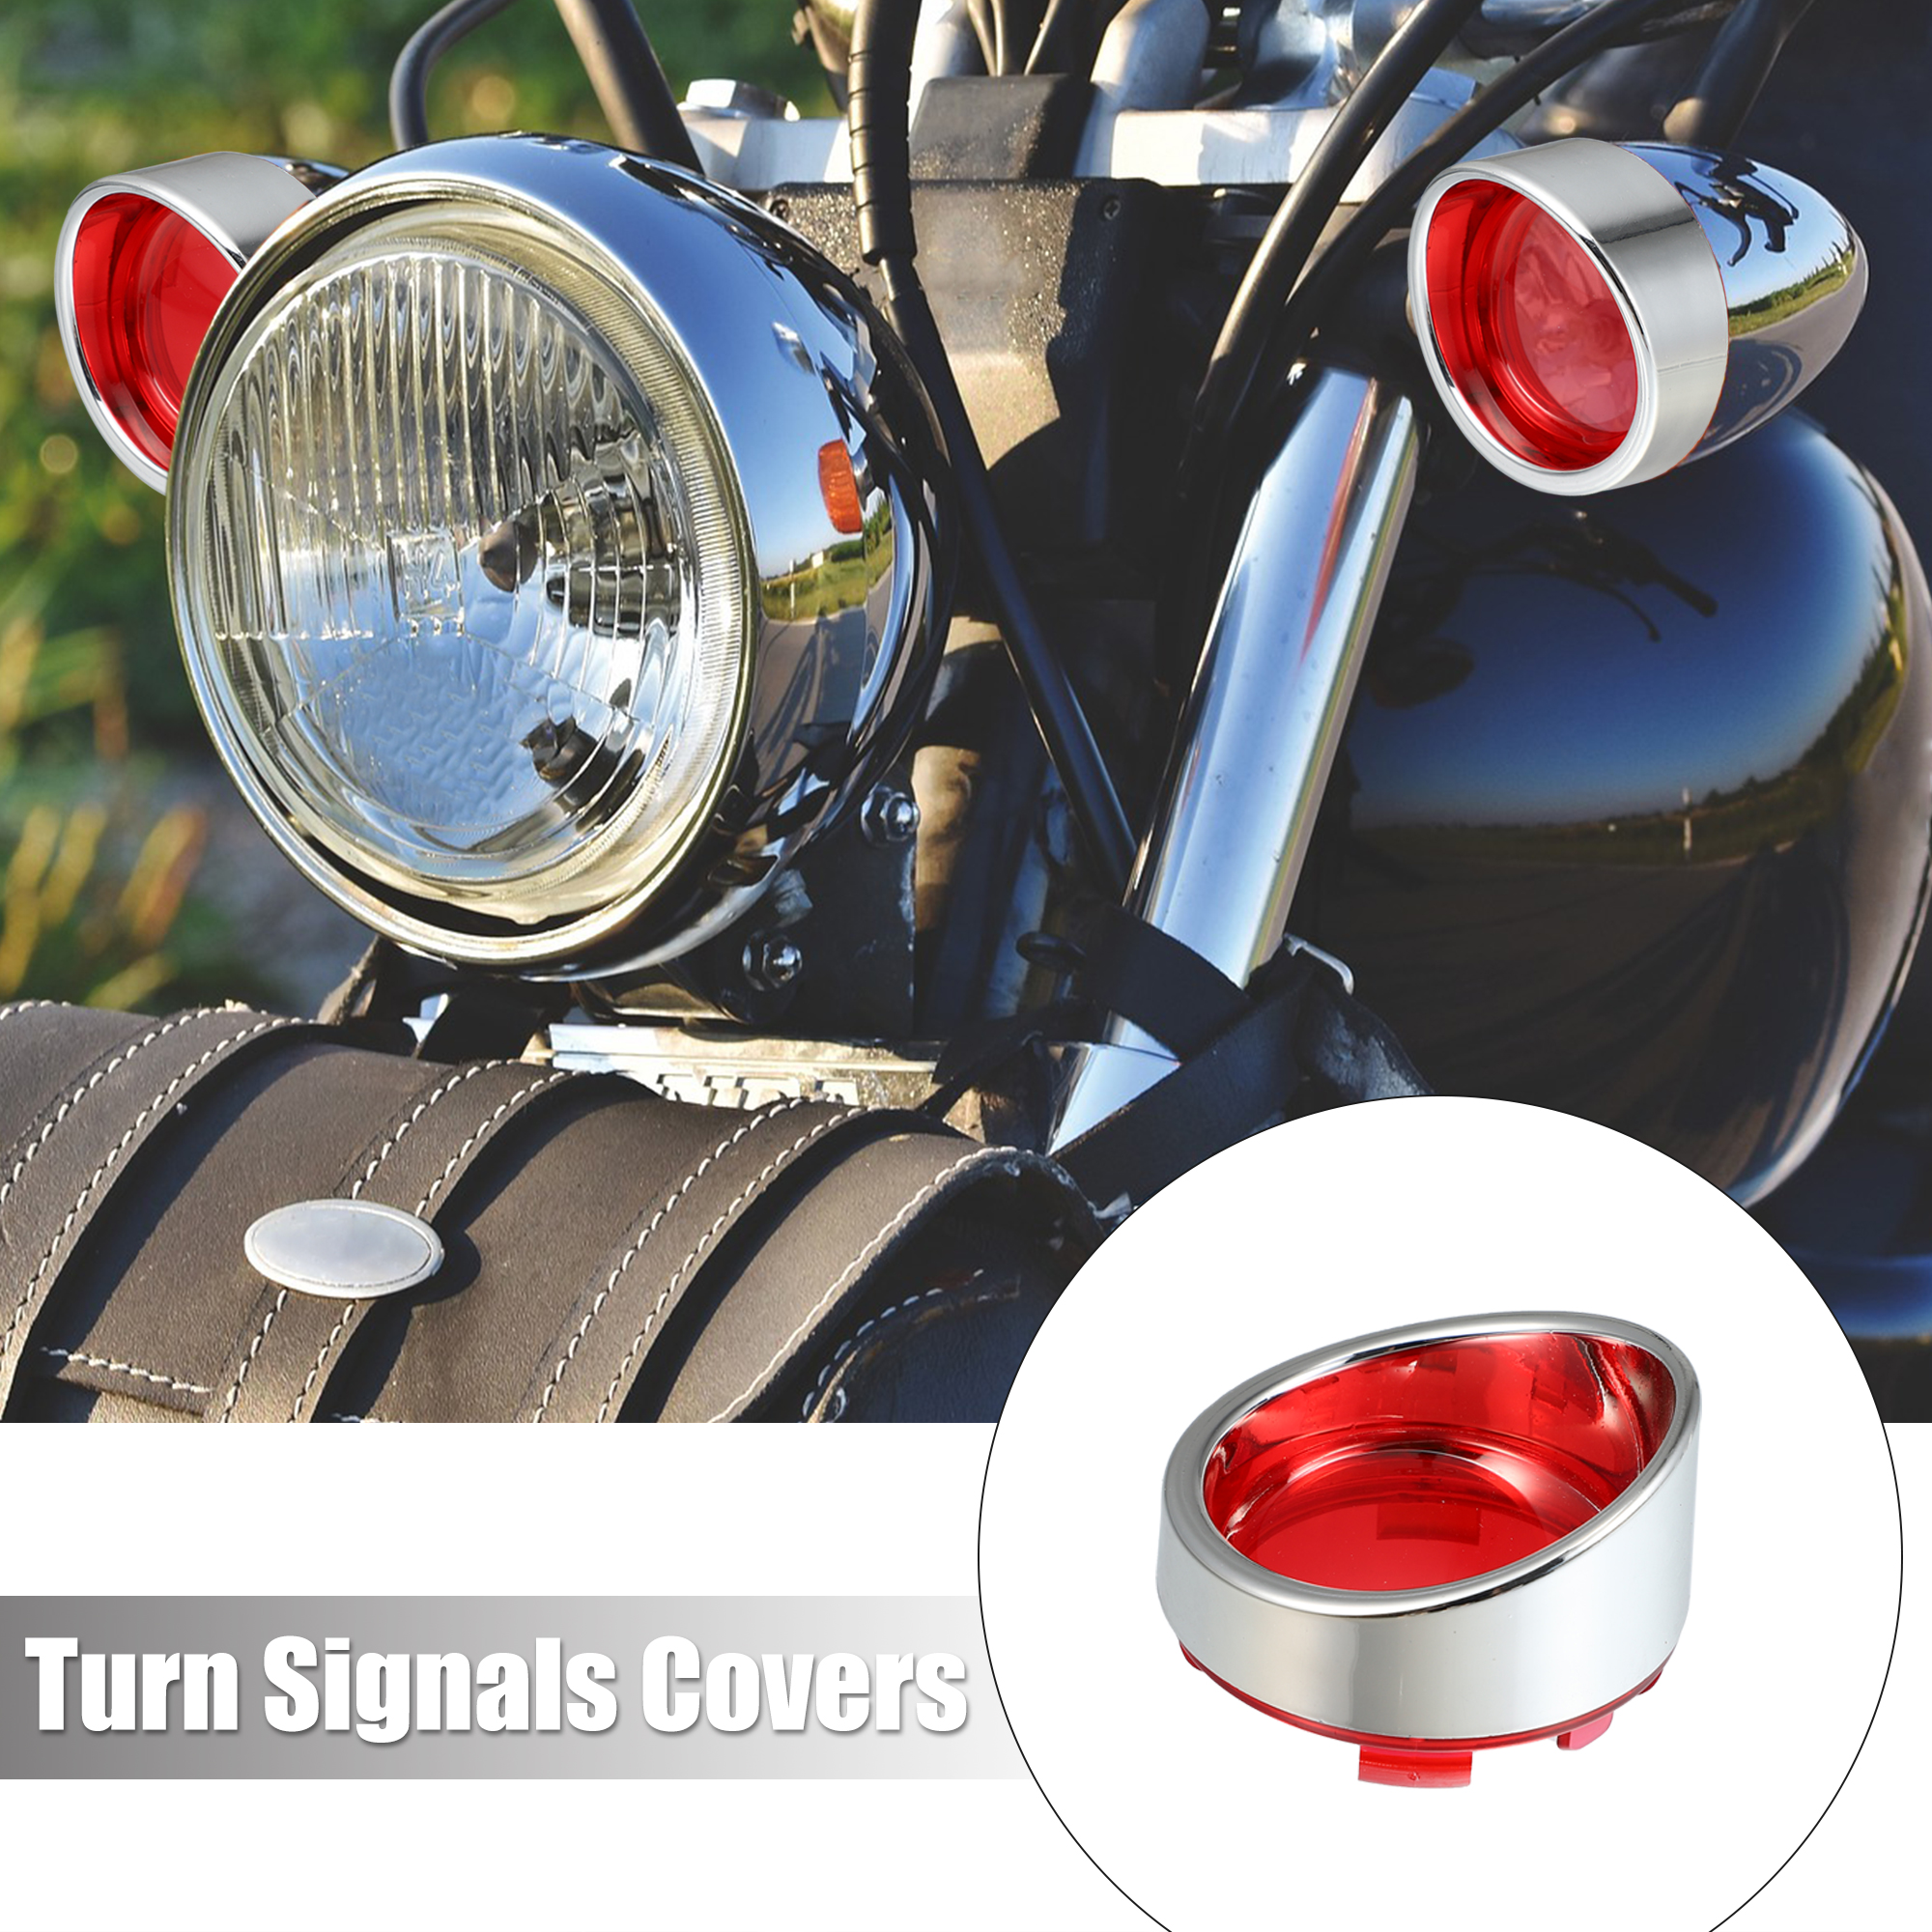 Unique Bargains 2pcs Turn Signal Light Covers with Silver Tone Visors for Harley Dyna Red